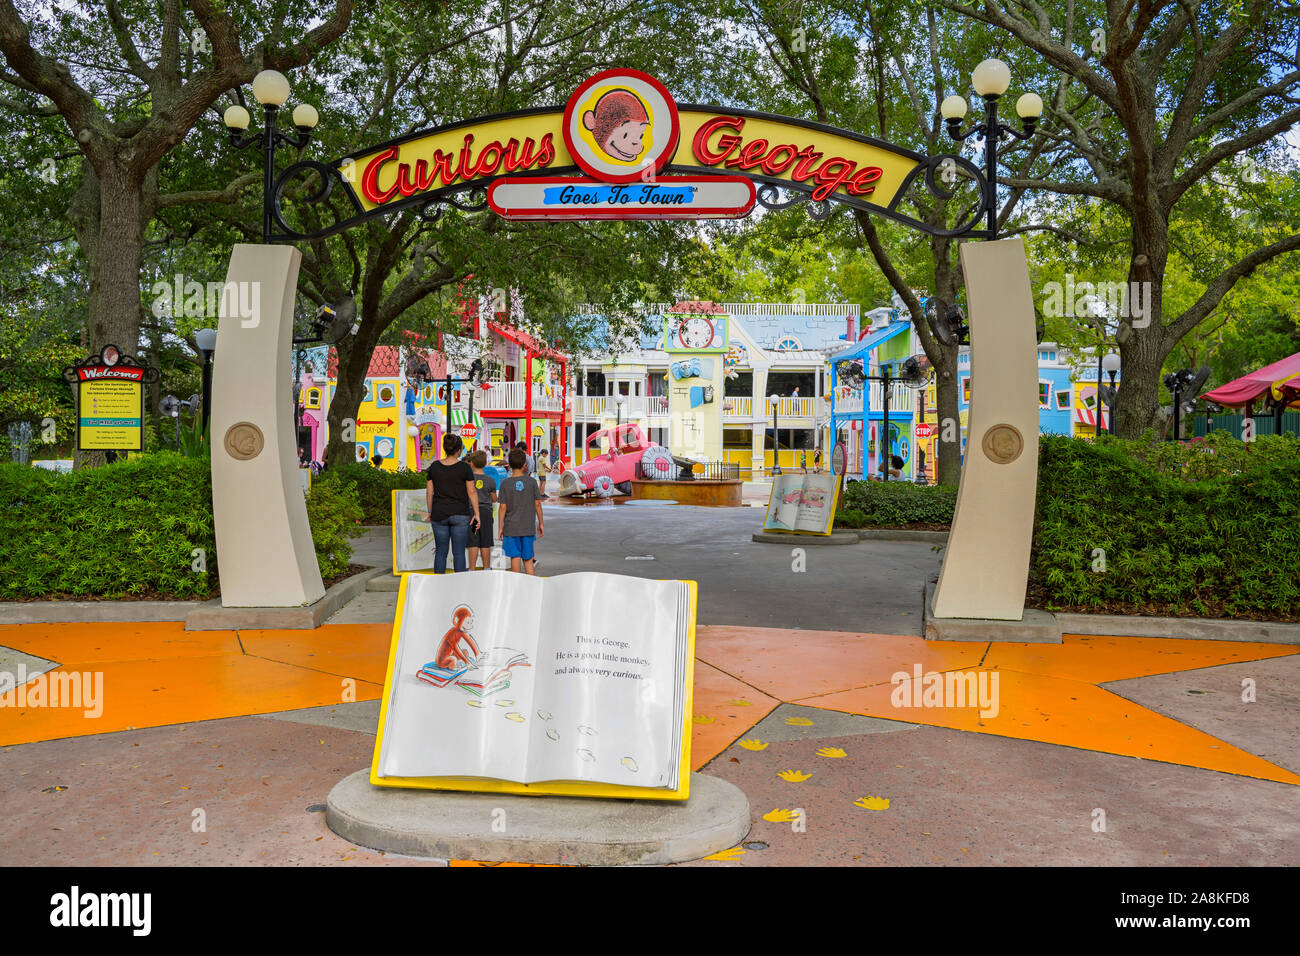 Entrance to Curious George Play Area for Kids, Curious George Goes to Town, Universal Studios, Orlando, Florida, USA Stock Photo